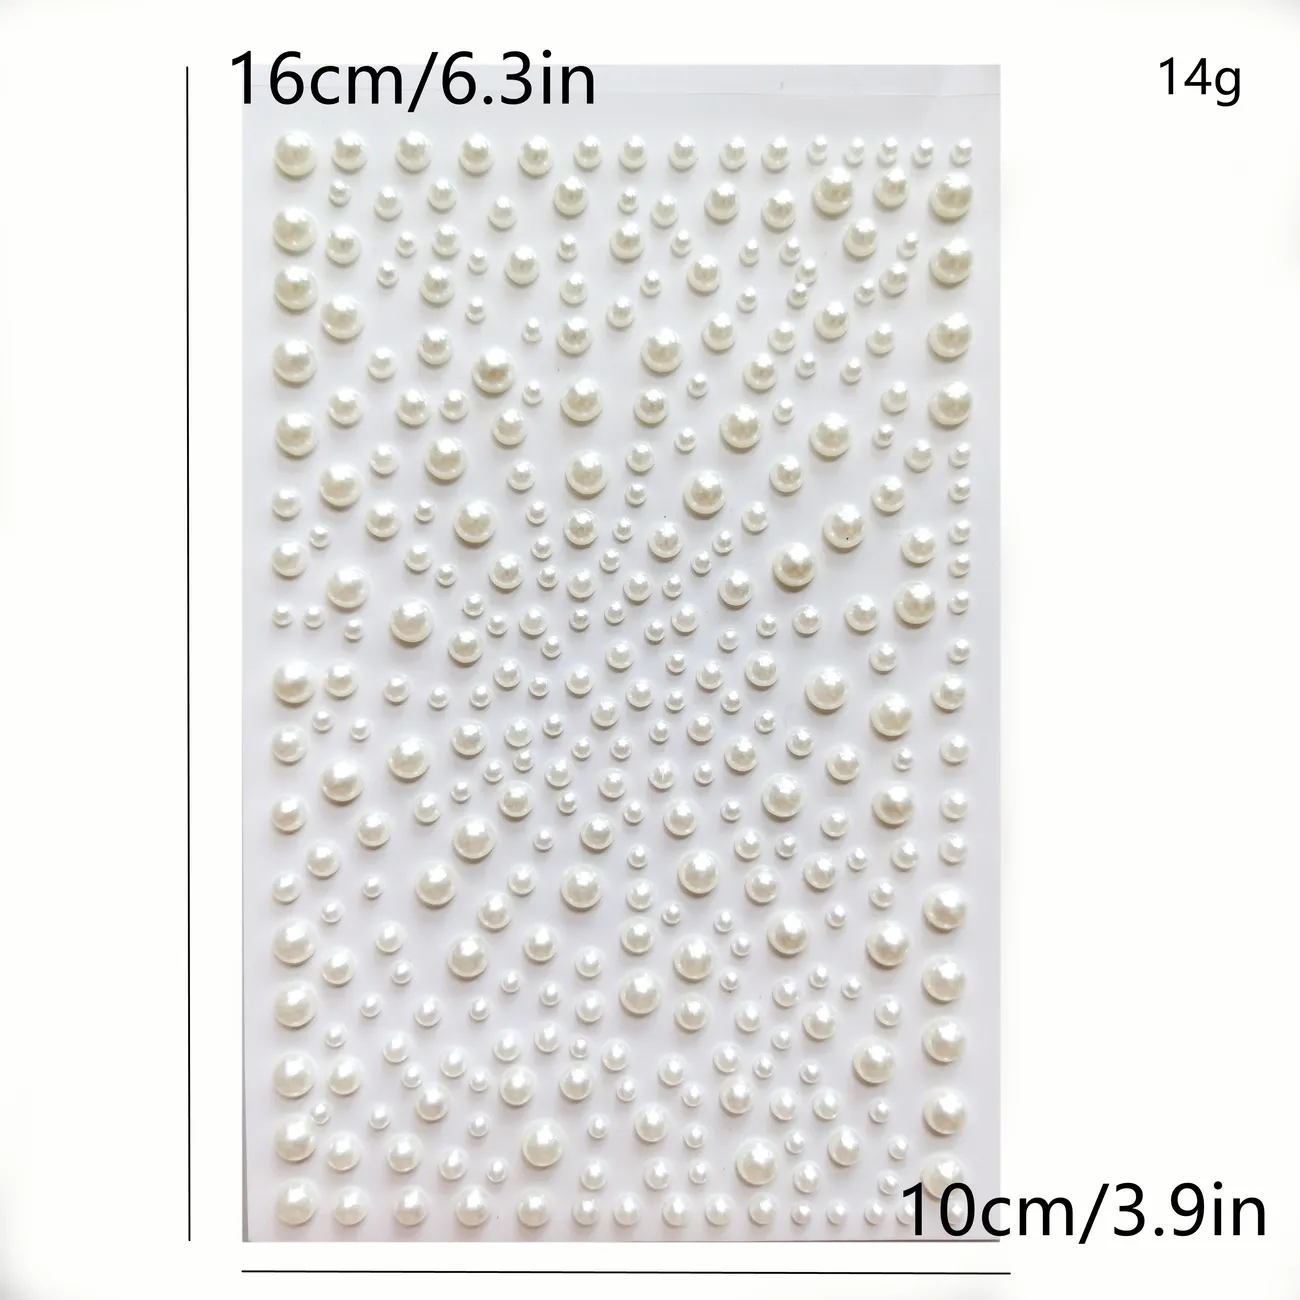  Senkary 840 Pieces (5 Sizes) Self-Adhesive Hair Pearl Stickers  Flat Back Pearl Sheets for Crafts, Wedding, Face, Makeup